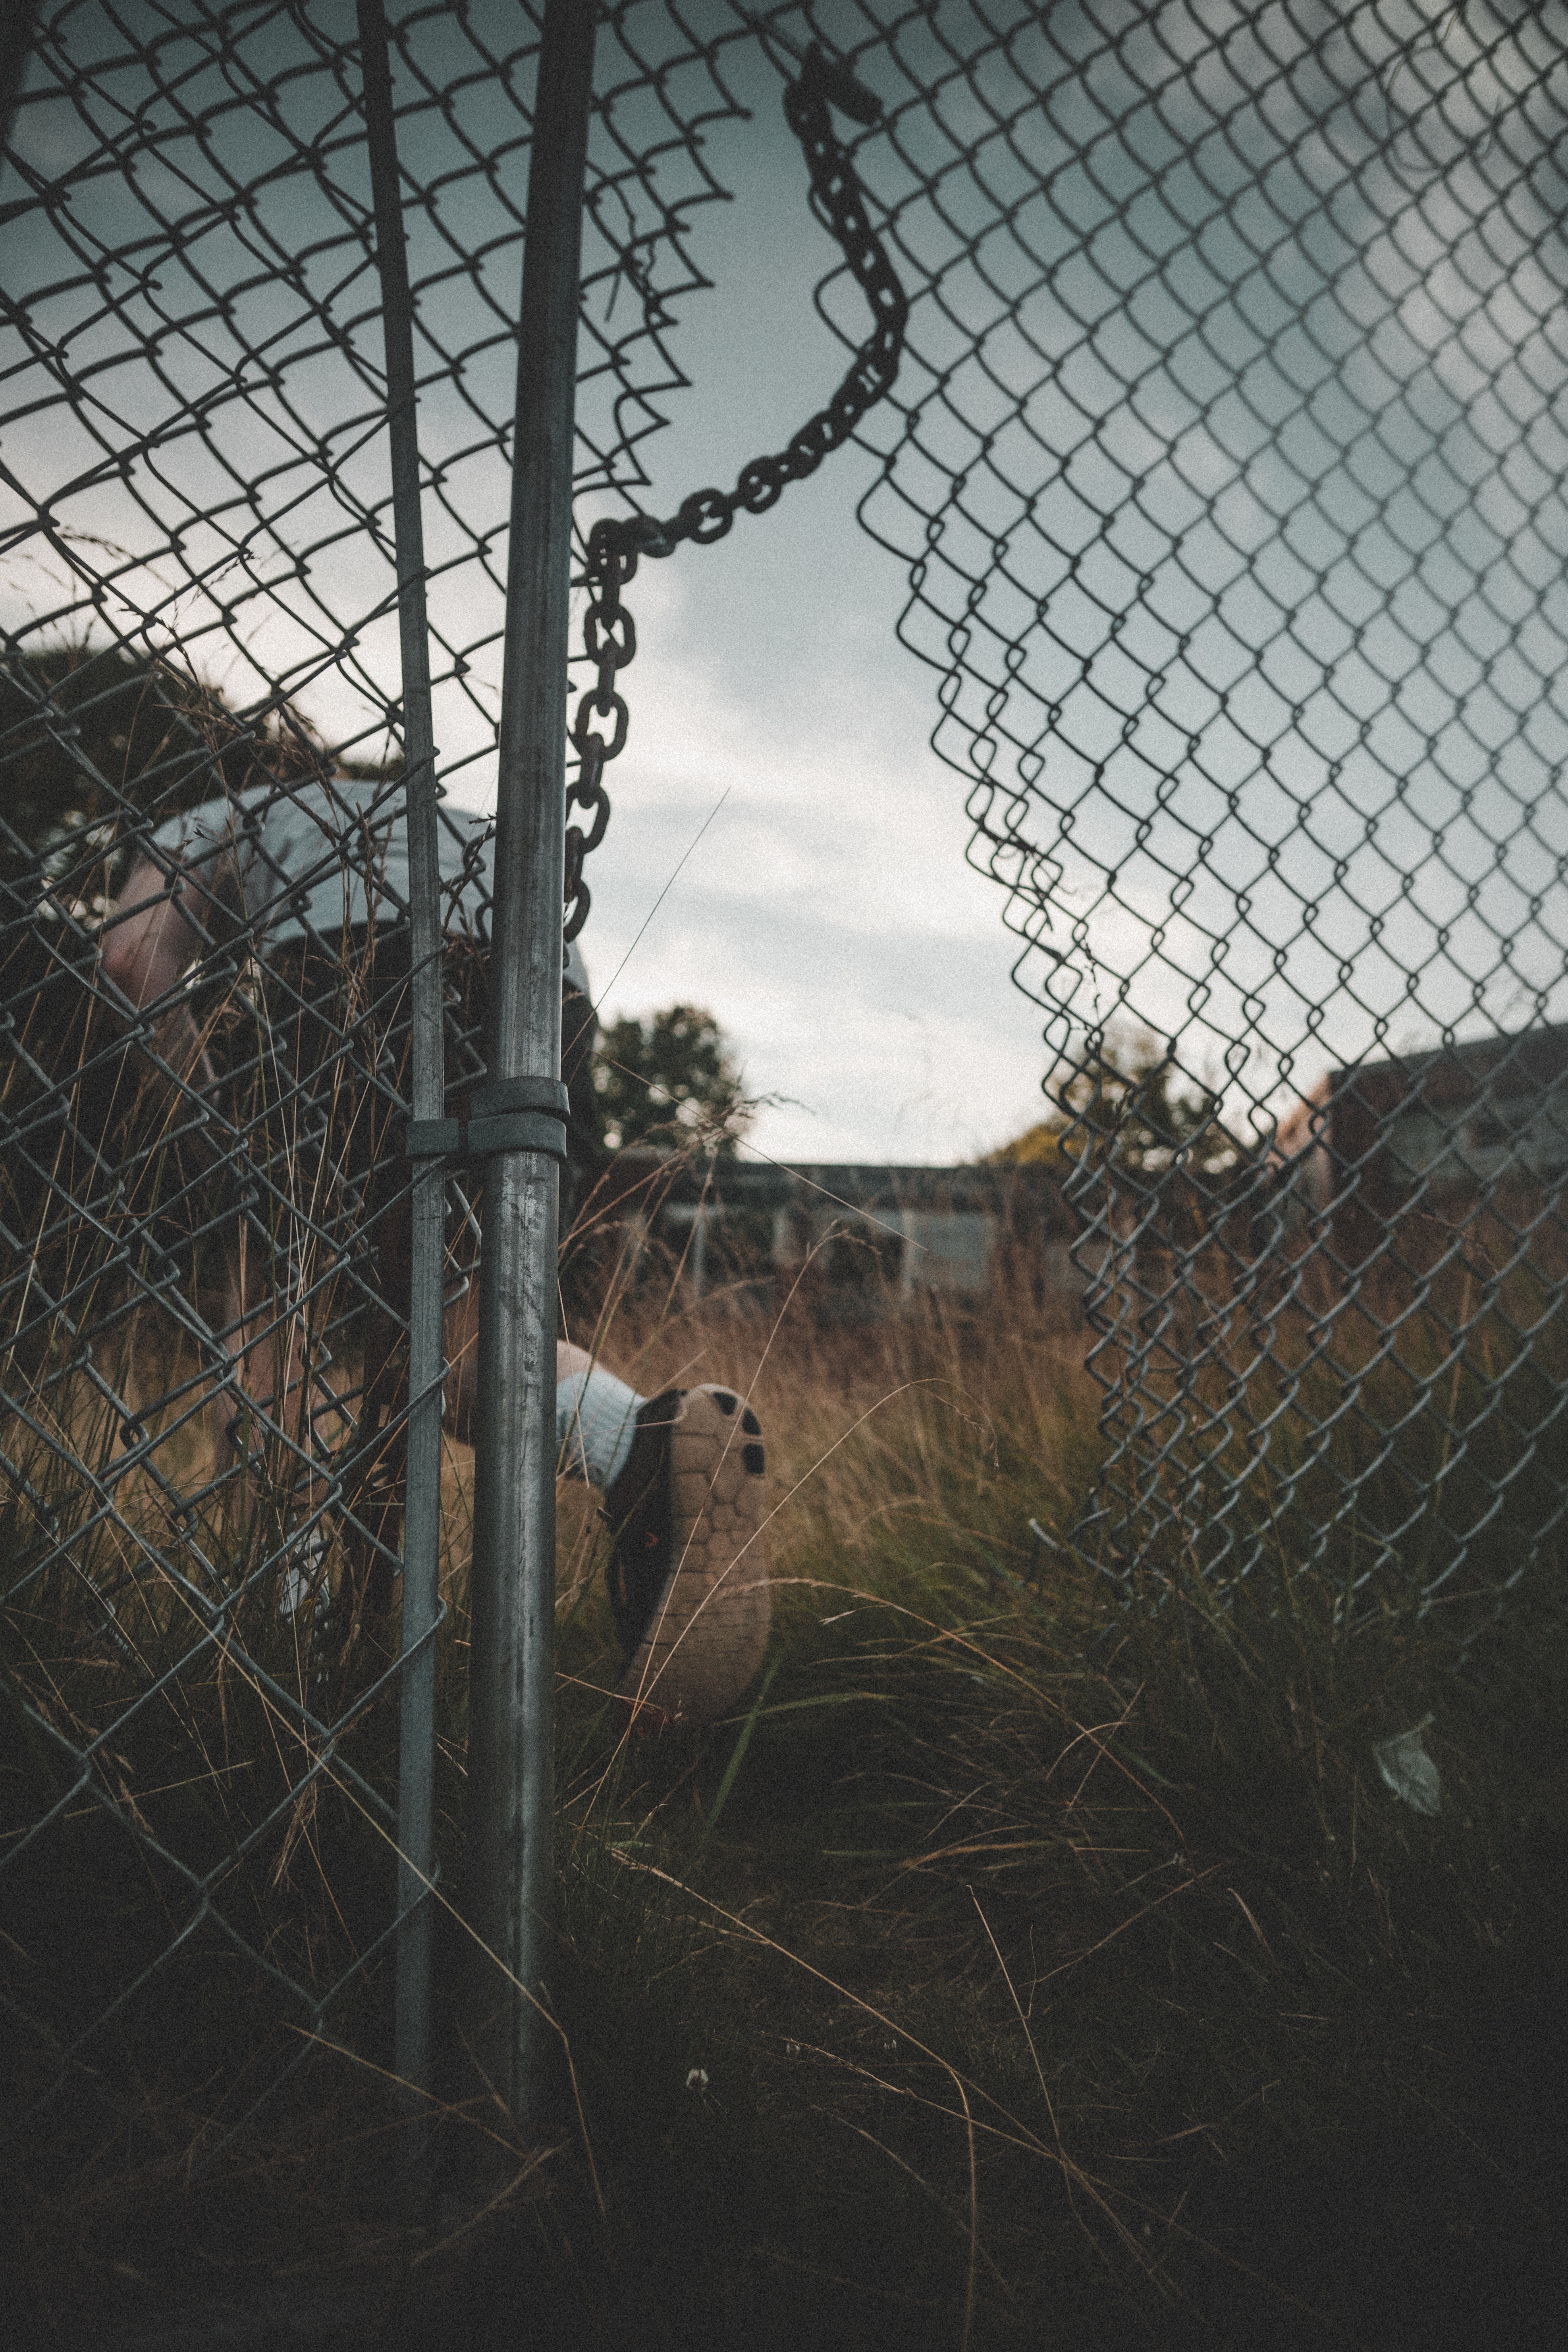 person-going-through-a-broken-wire-fence-2953898